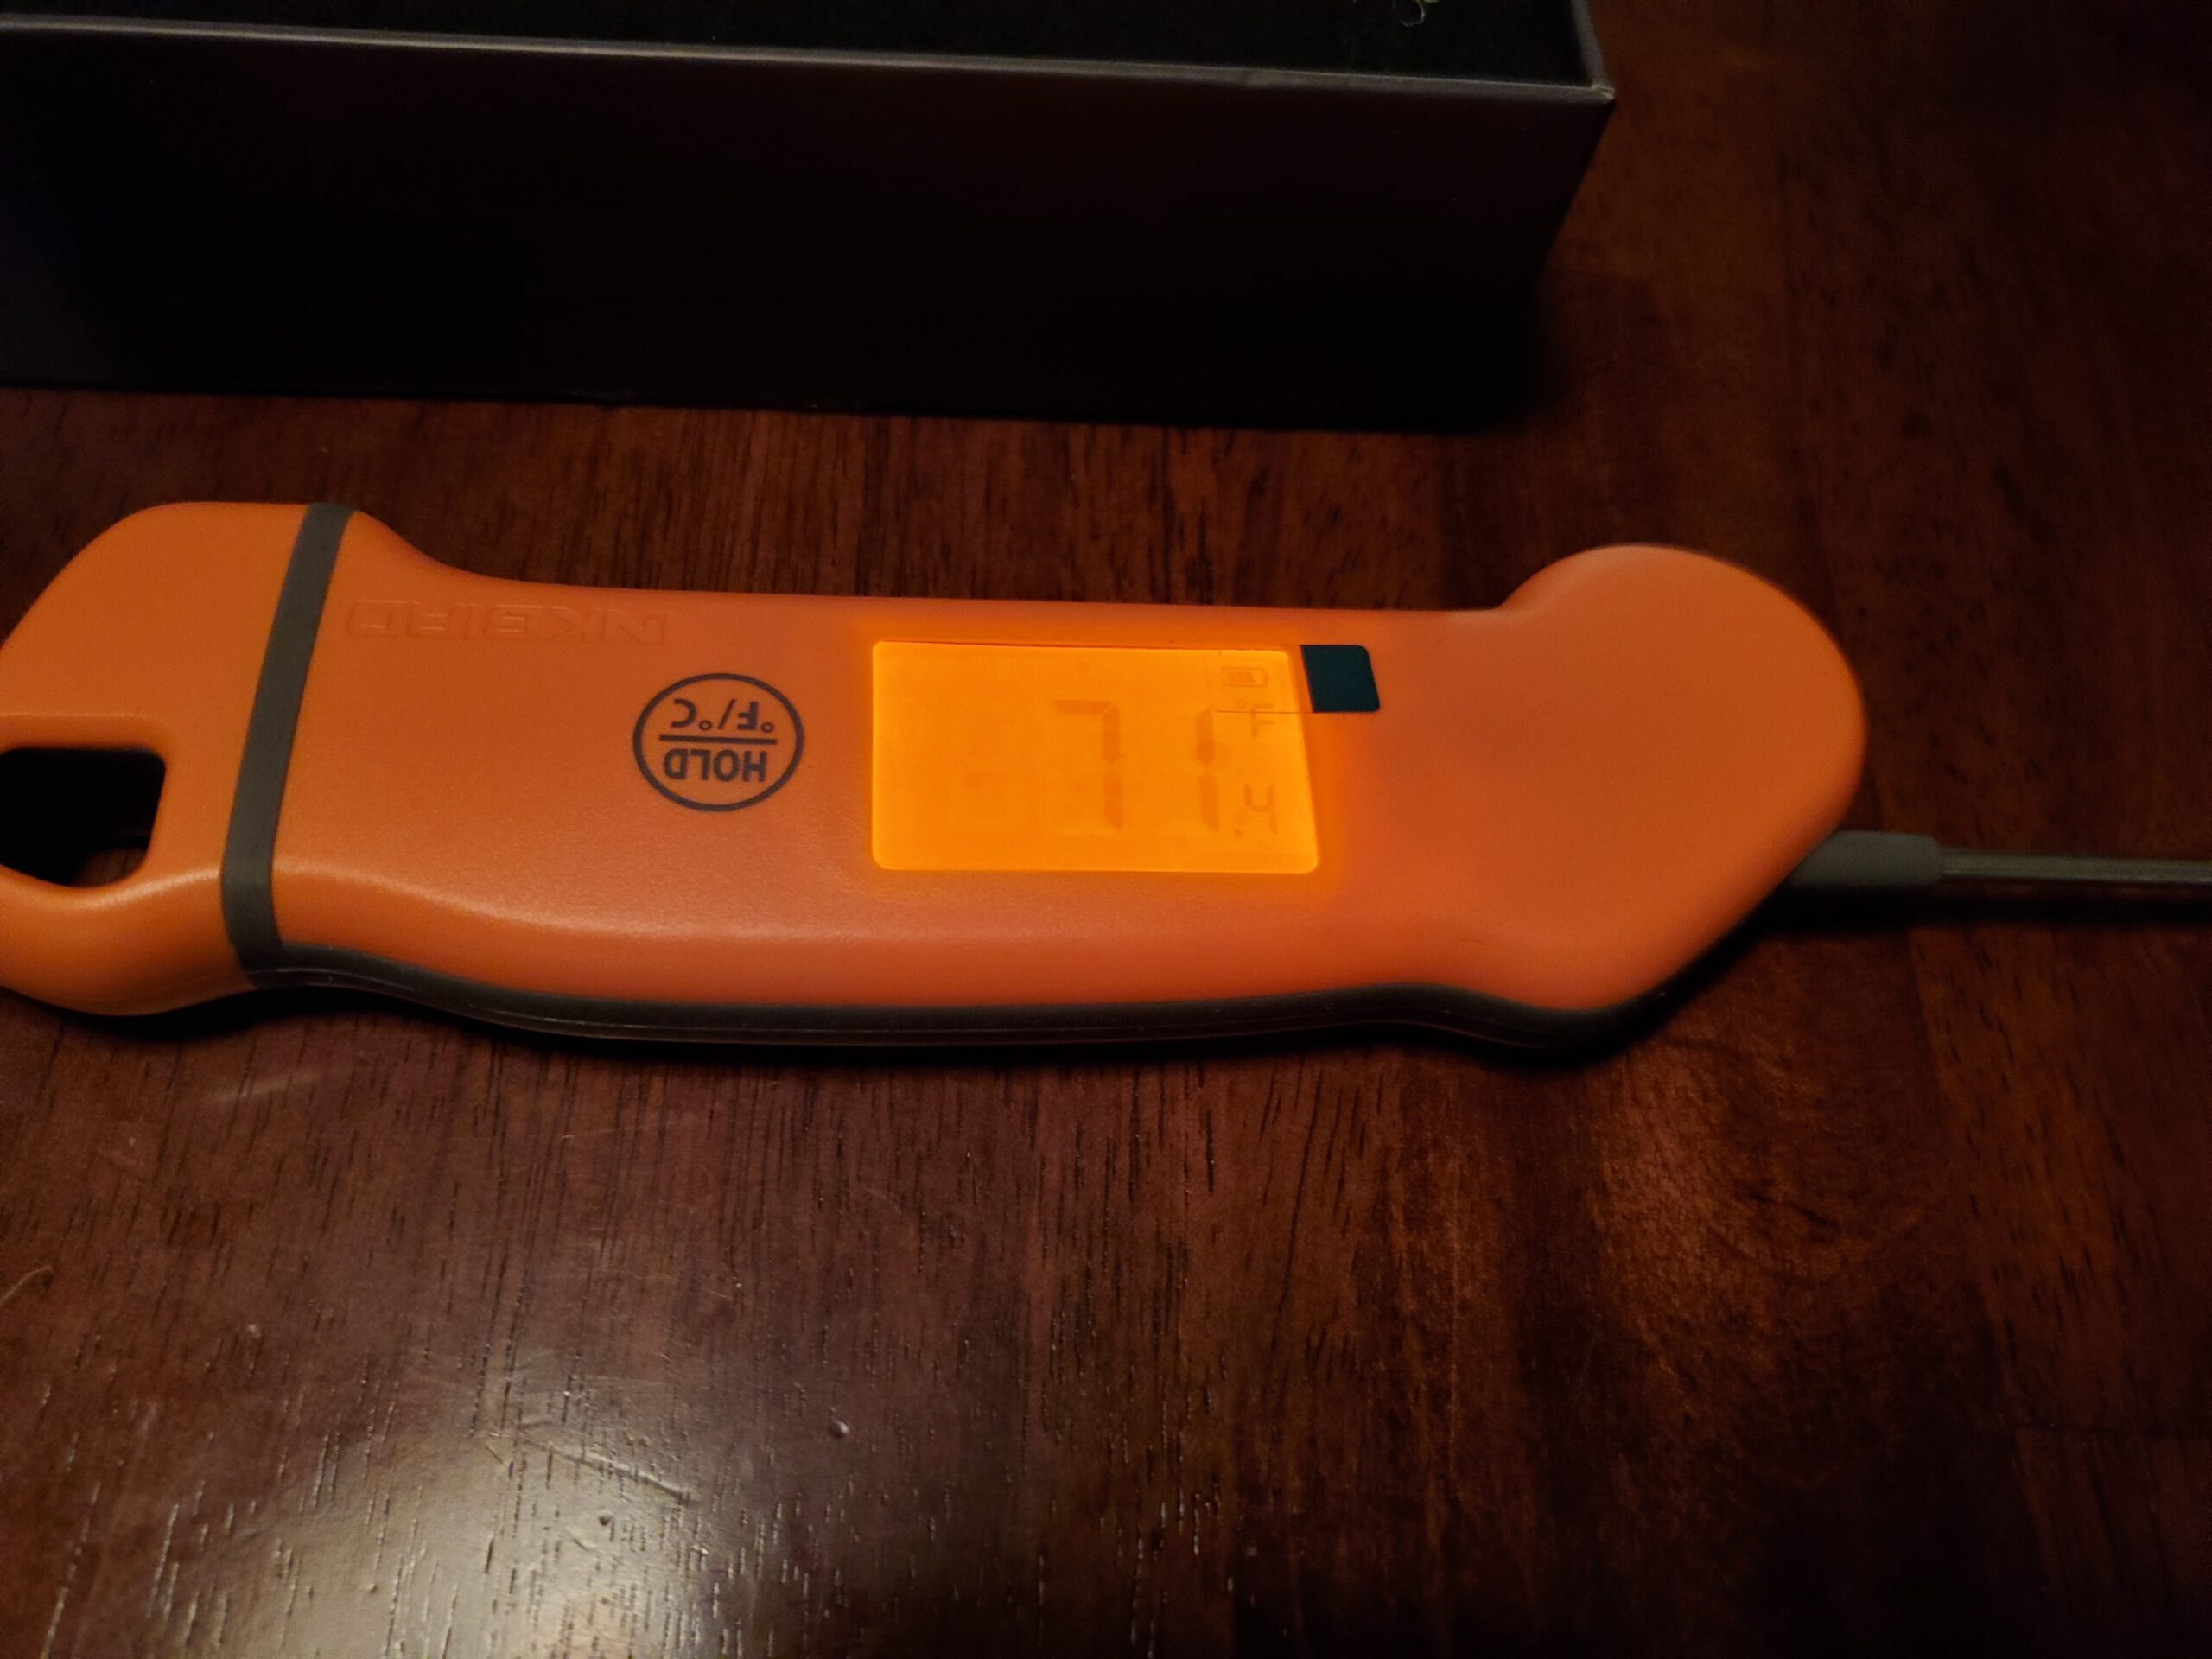 Unboxing/Review of INKBIRD instant read hybrid thermometer 